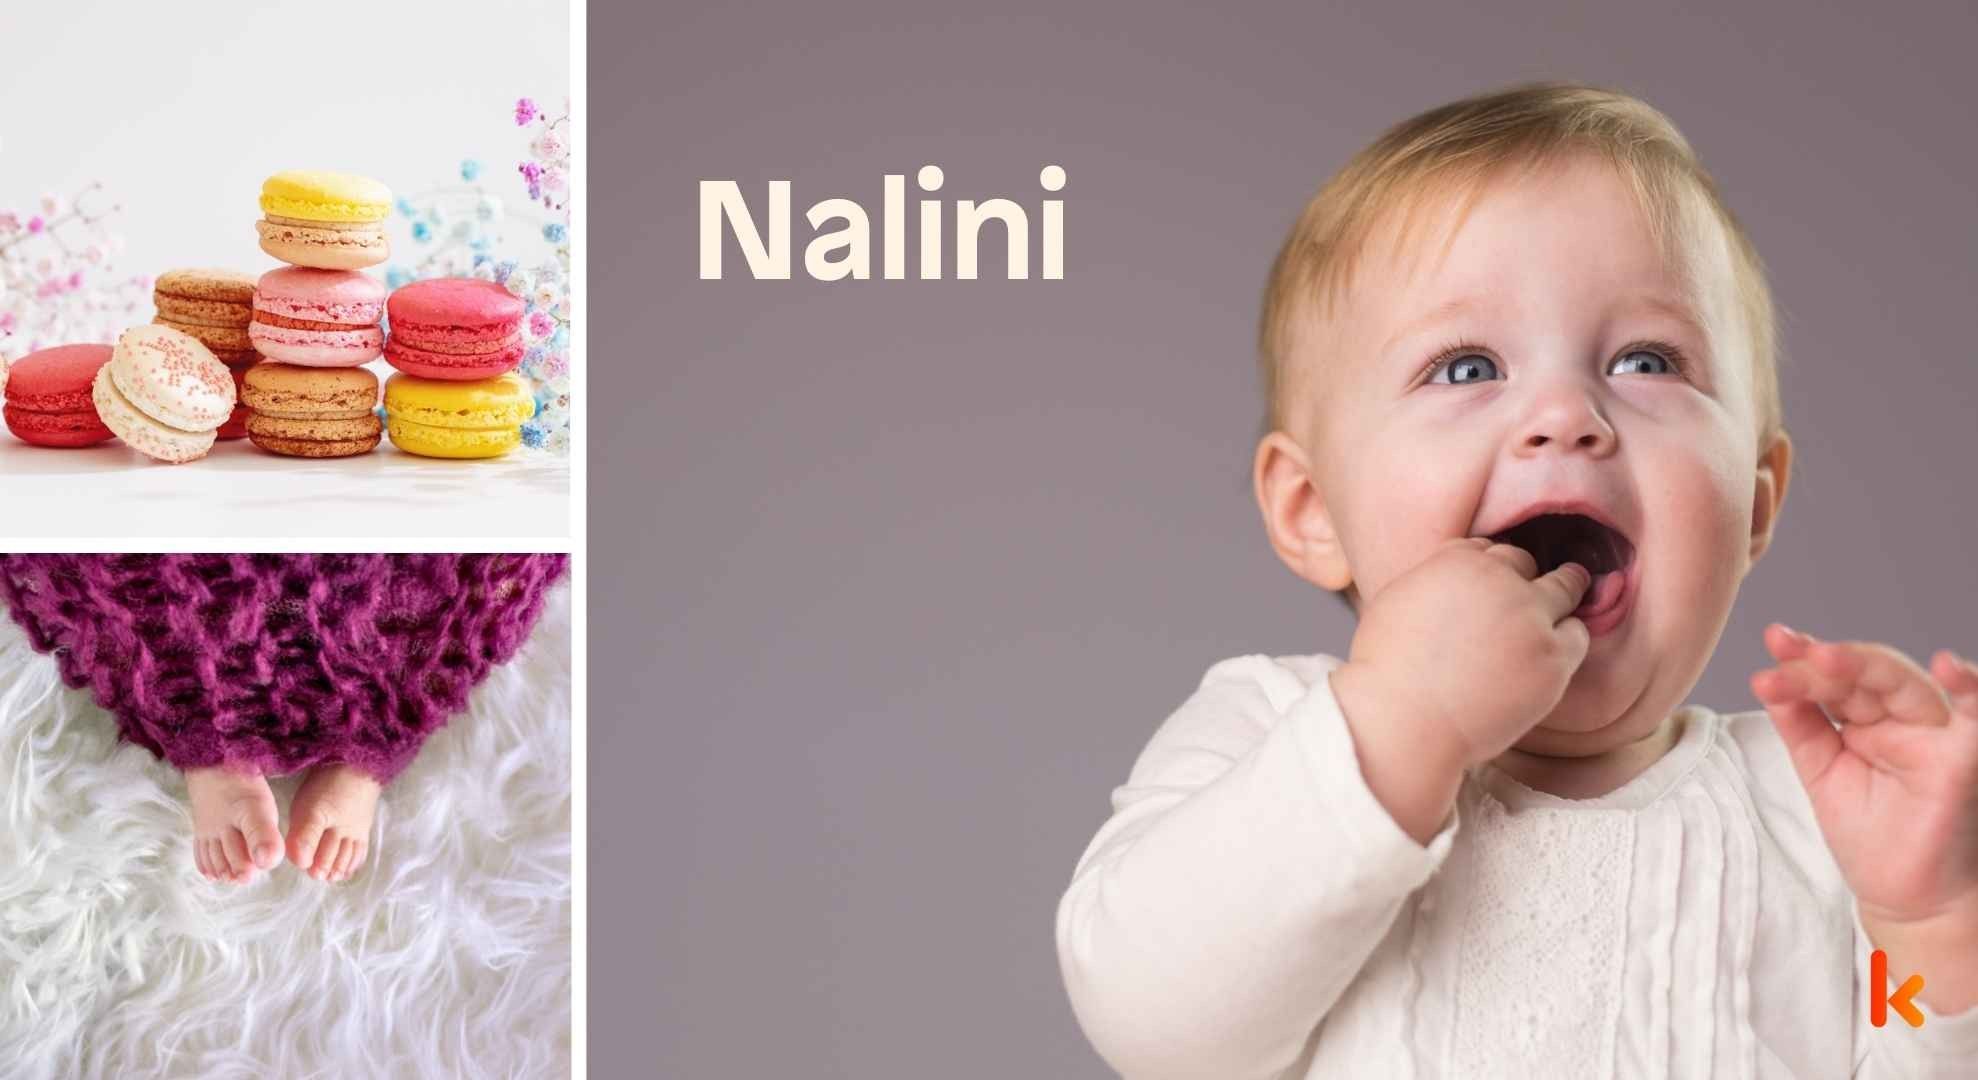 Meaning of the name Nalini